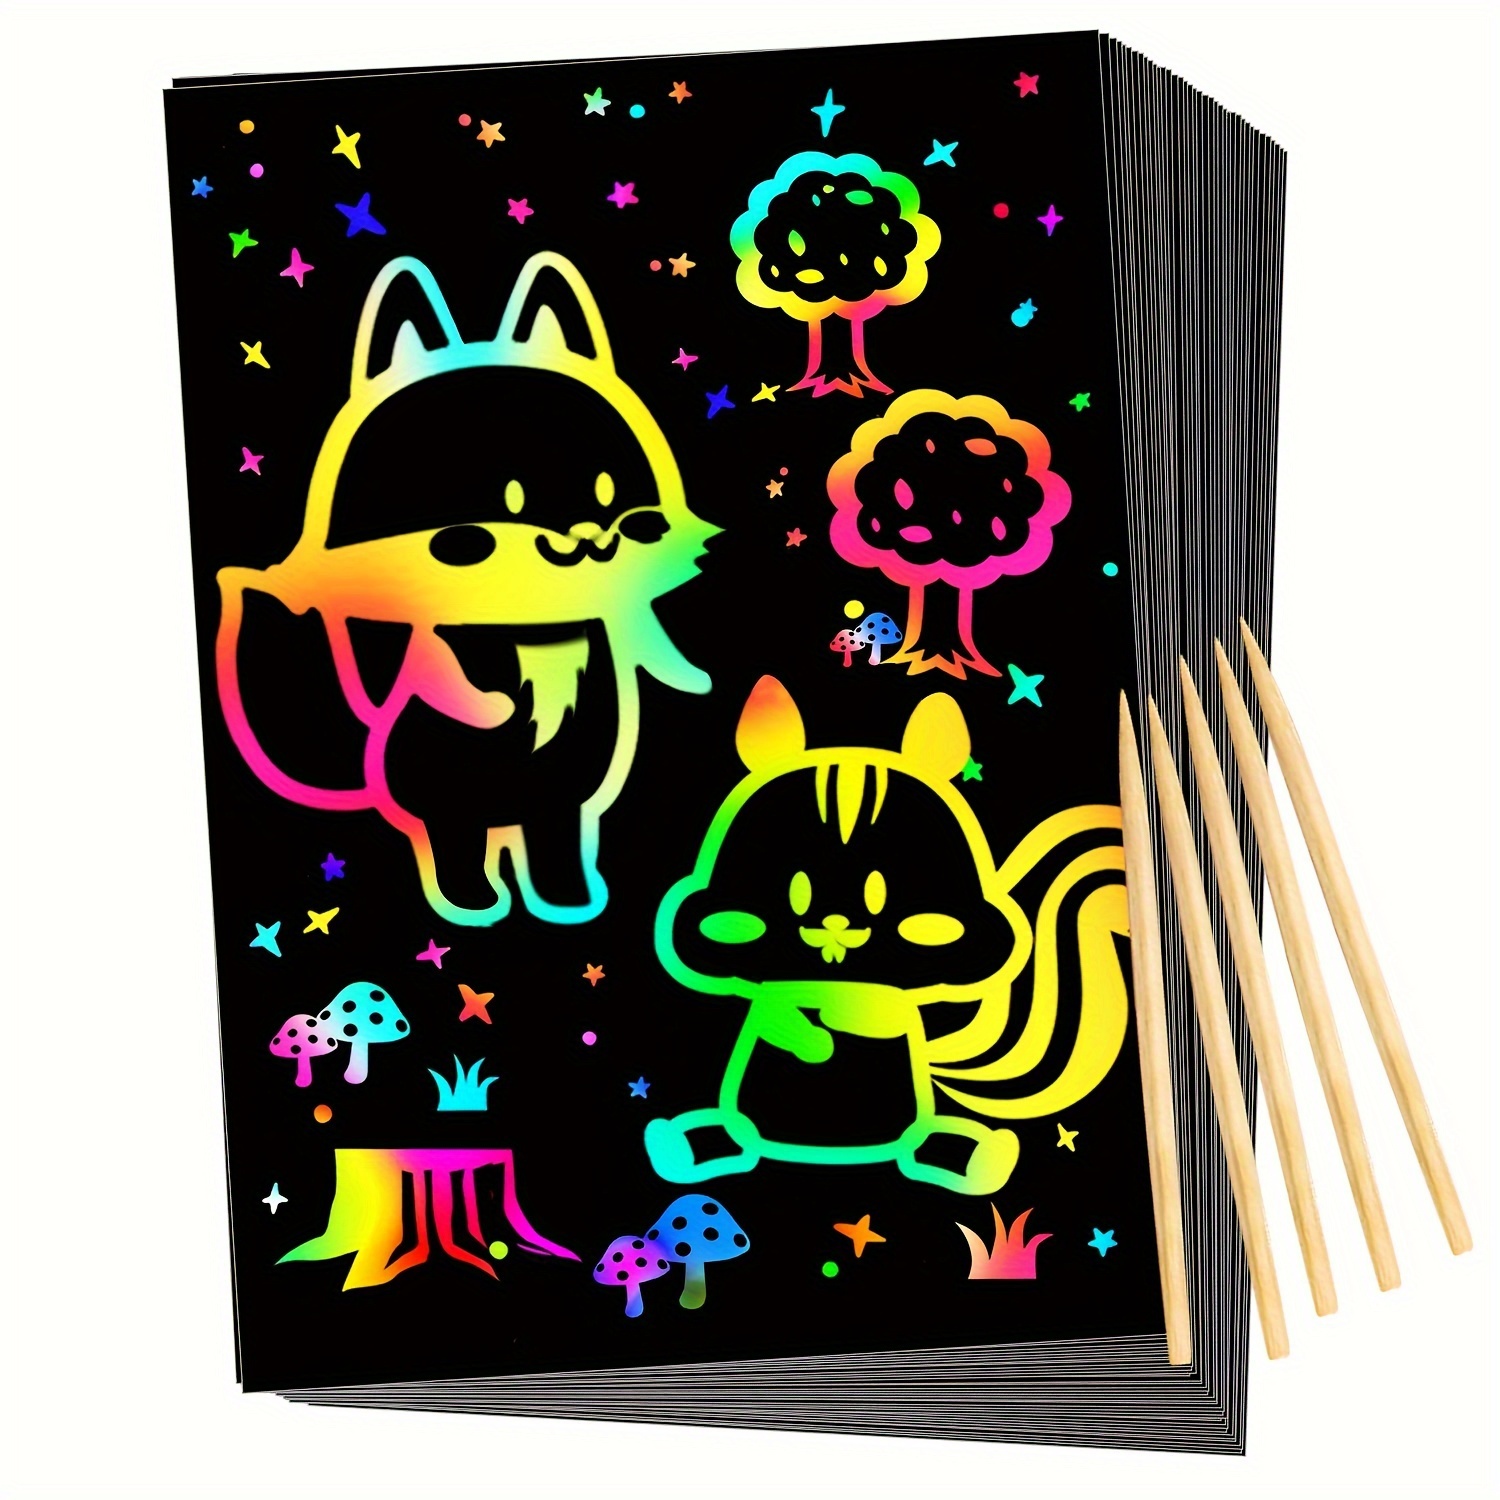 

60pcs/set, Scratch Paper Art Set, Rainbow Magic Scratch Paper Black Scratch Off Art Crafts Kits Notes With 5 Wooden Stylus Halloween Party Game Christmas Birthday Gift